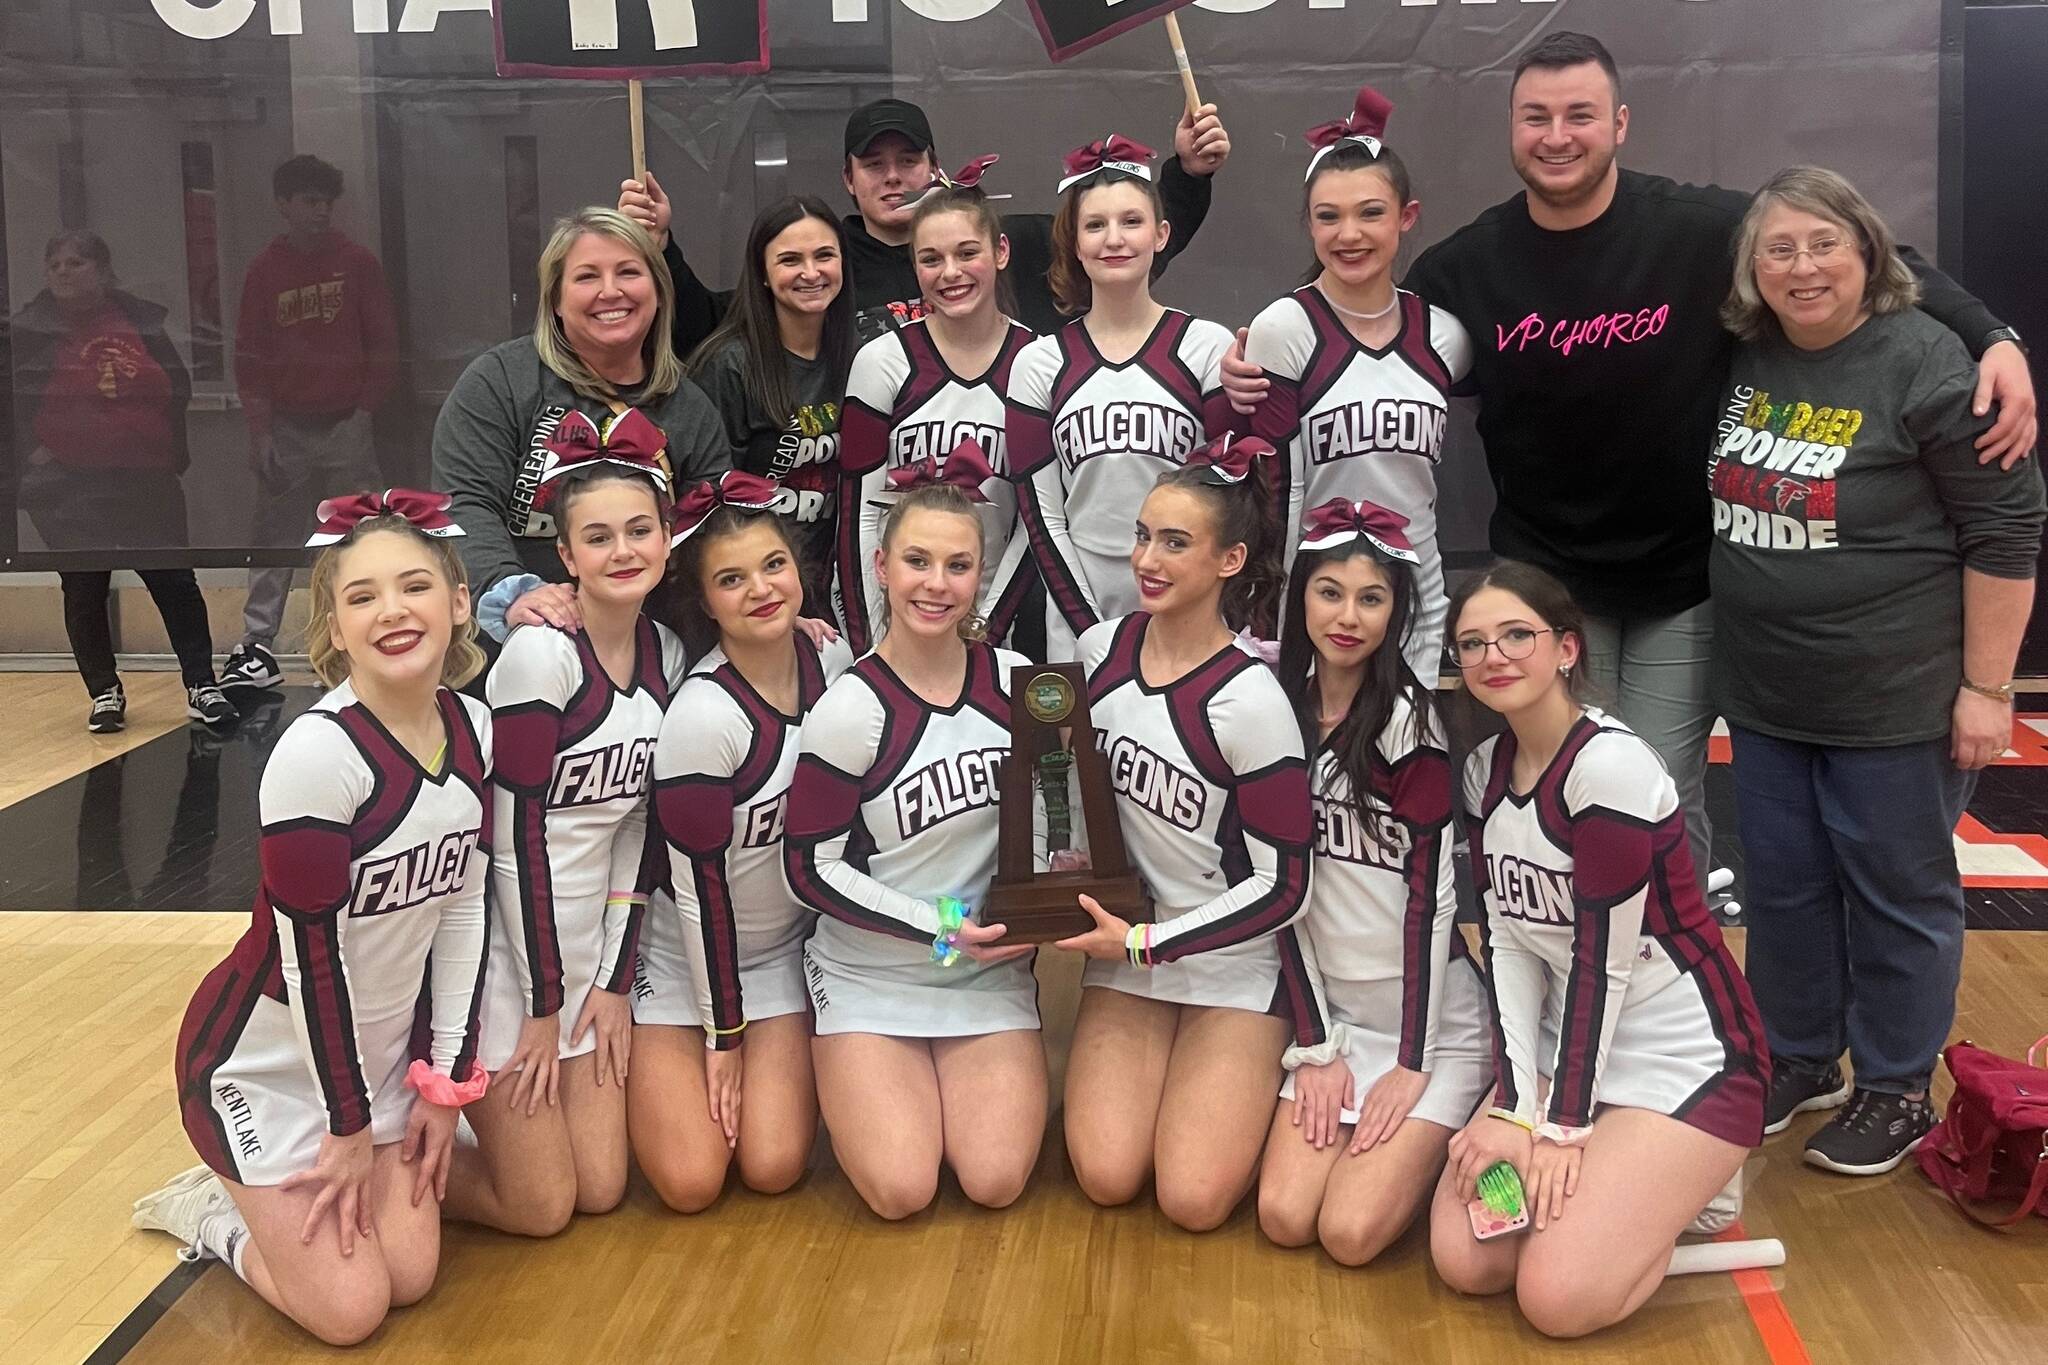 Courtesy photo
Pictured: Kentlake High School’s cheer team. Kentlake won one category over Gig Harbor and 3A NPSL rival Auburn Riverside in the 3A Game Day Small event. The Falcons scored 77.6 just beating out the Tides, who scored 76.6.